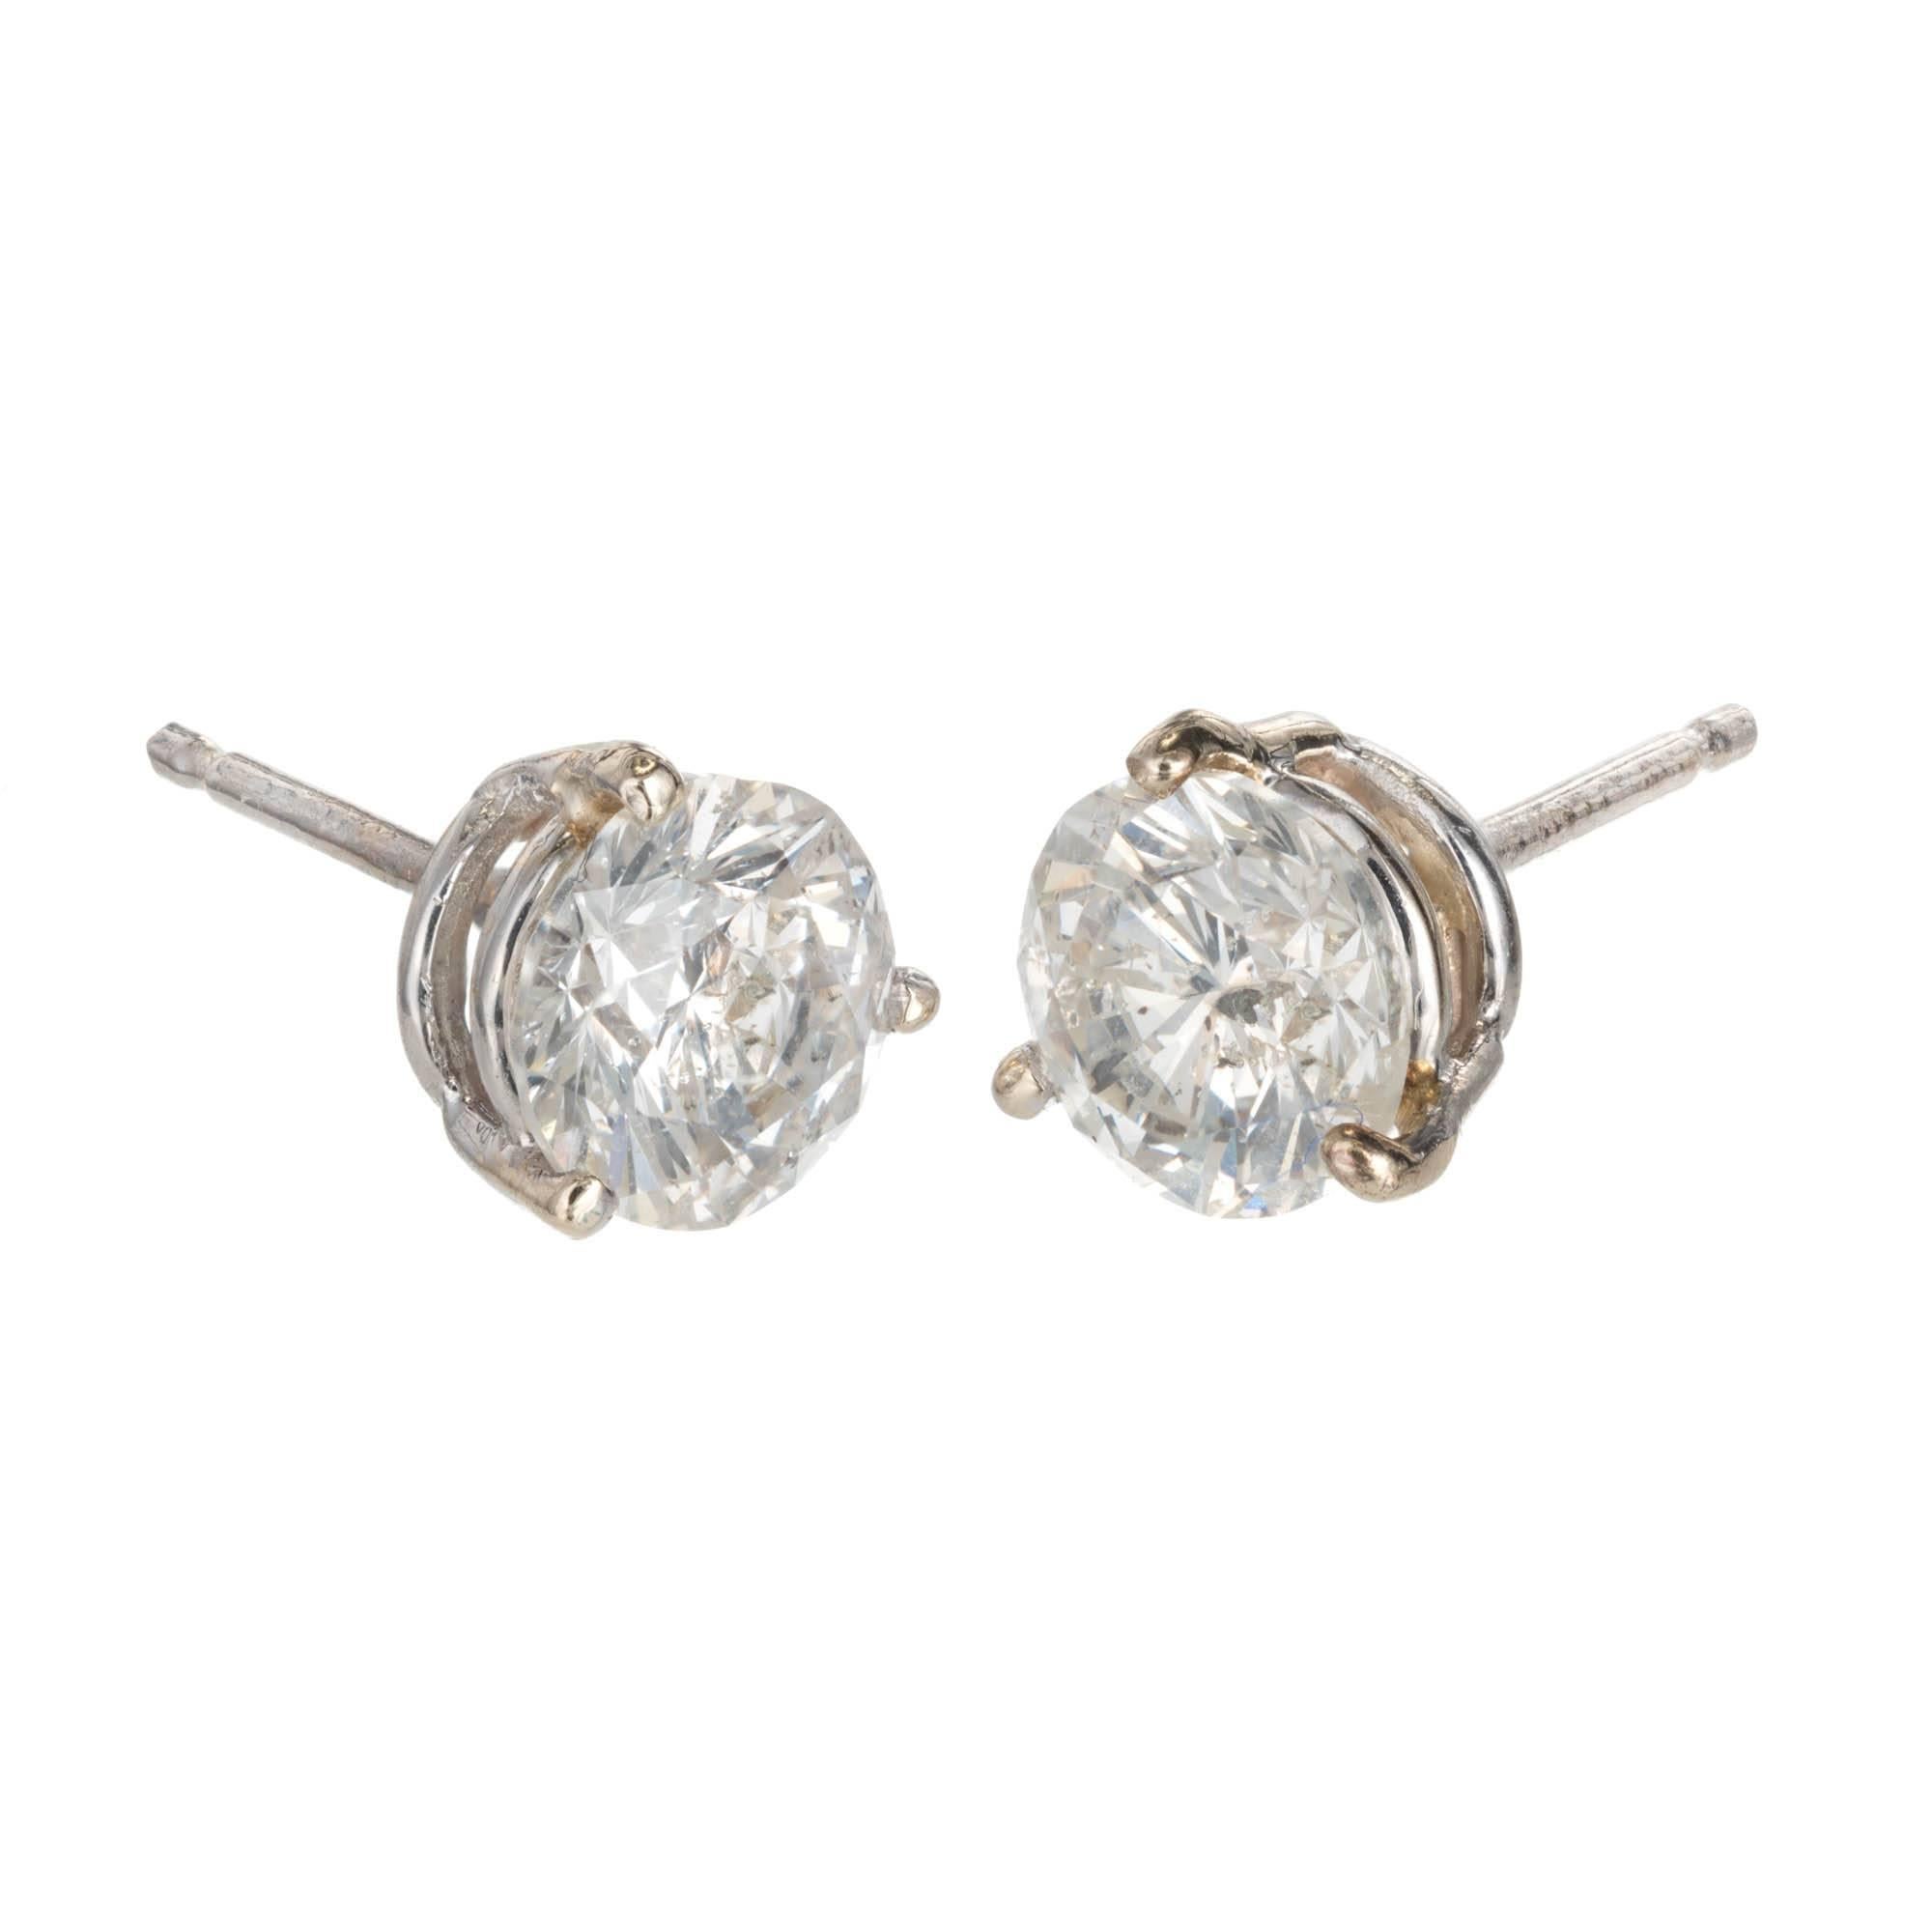 1.50ct Diamond Stud Earrings in 14k White Gold 3 Prong Baskets.

1 round brilliant cut diamond, approx. total weight .75cts, H-I, SI3, 5.76 x 5.74 x 4.0mm, EGL certificate#US66844301J
1 round brilliant cut diamond, approx. total weight .75cts, H-I,